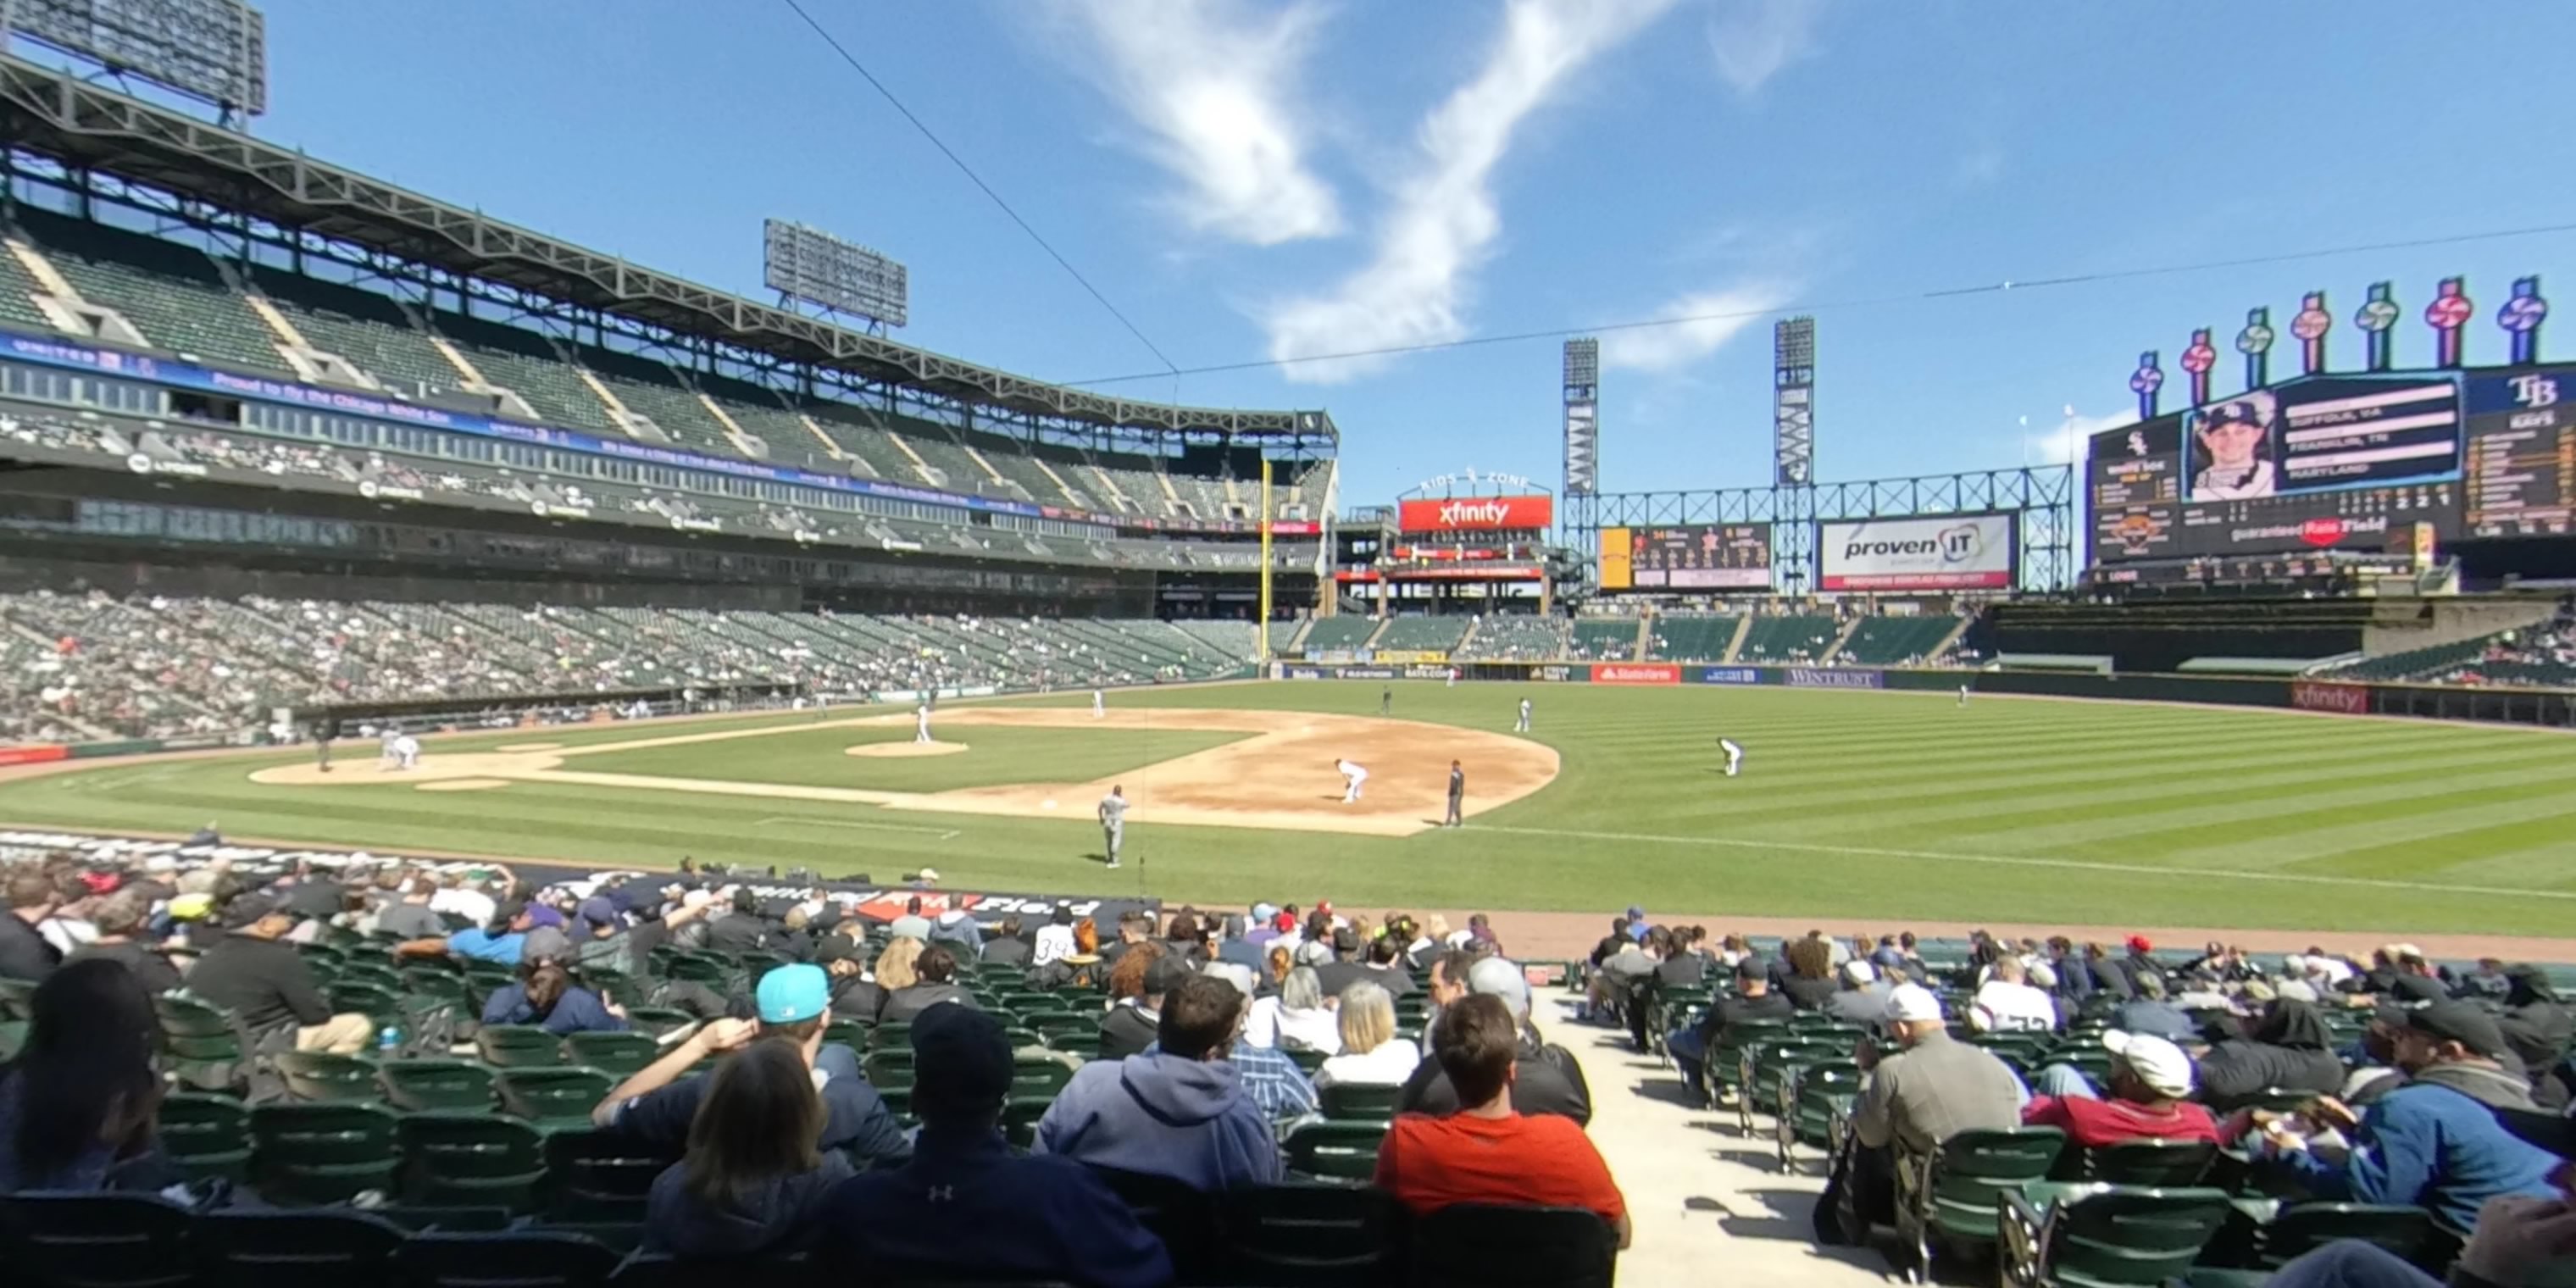 section 120 panoramic seat view  - guaranteed rate field